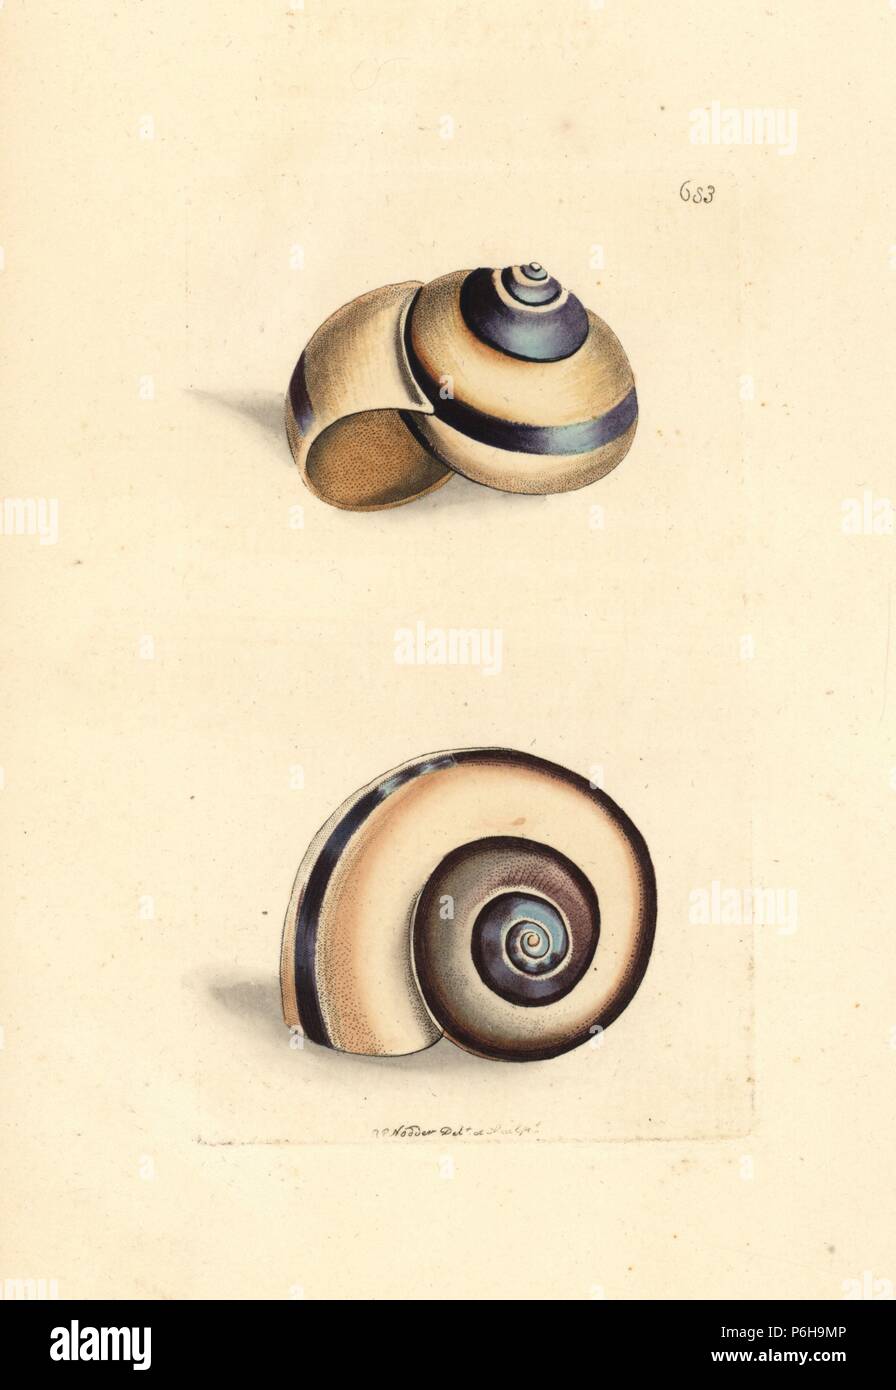 Citron snail, Helix citrina. Illustration drawn and engraved by Richard Polydore Nodder. Handcoloured copperplate engraving from George Shaw and Frederick Nodder's The Naturalist's Miscellany, London, 1804. Stock Photo